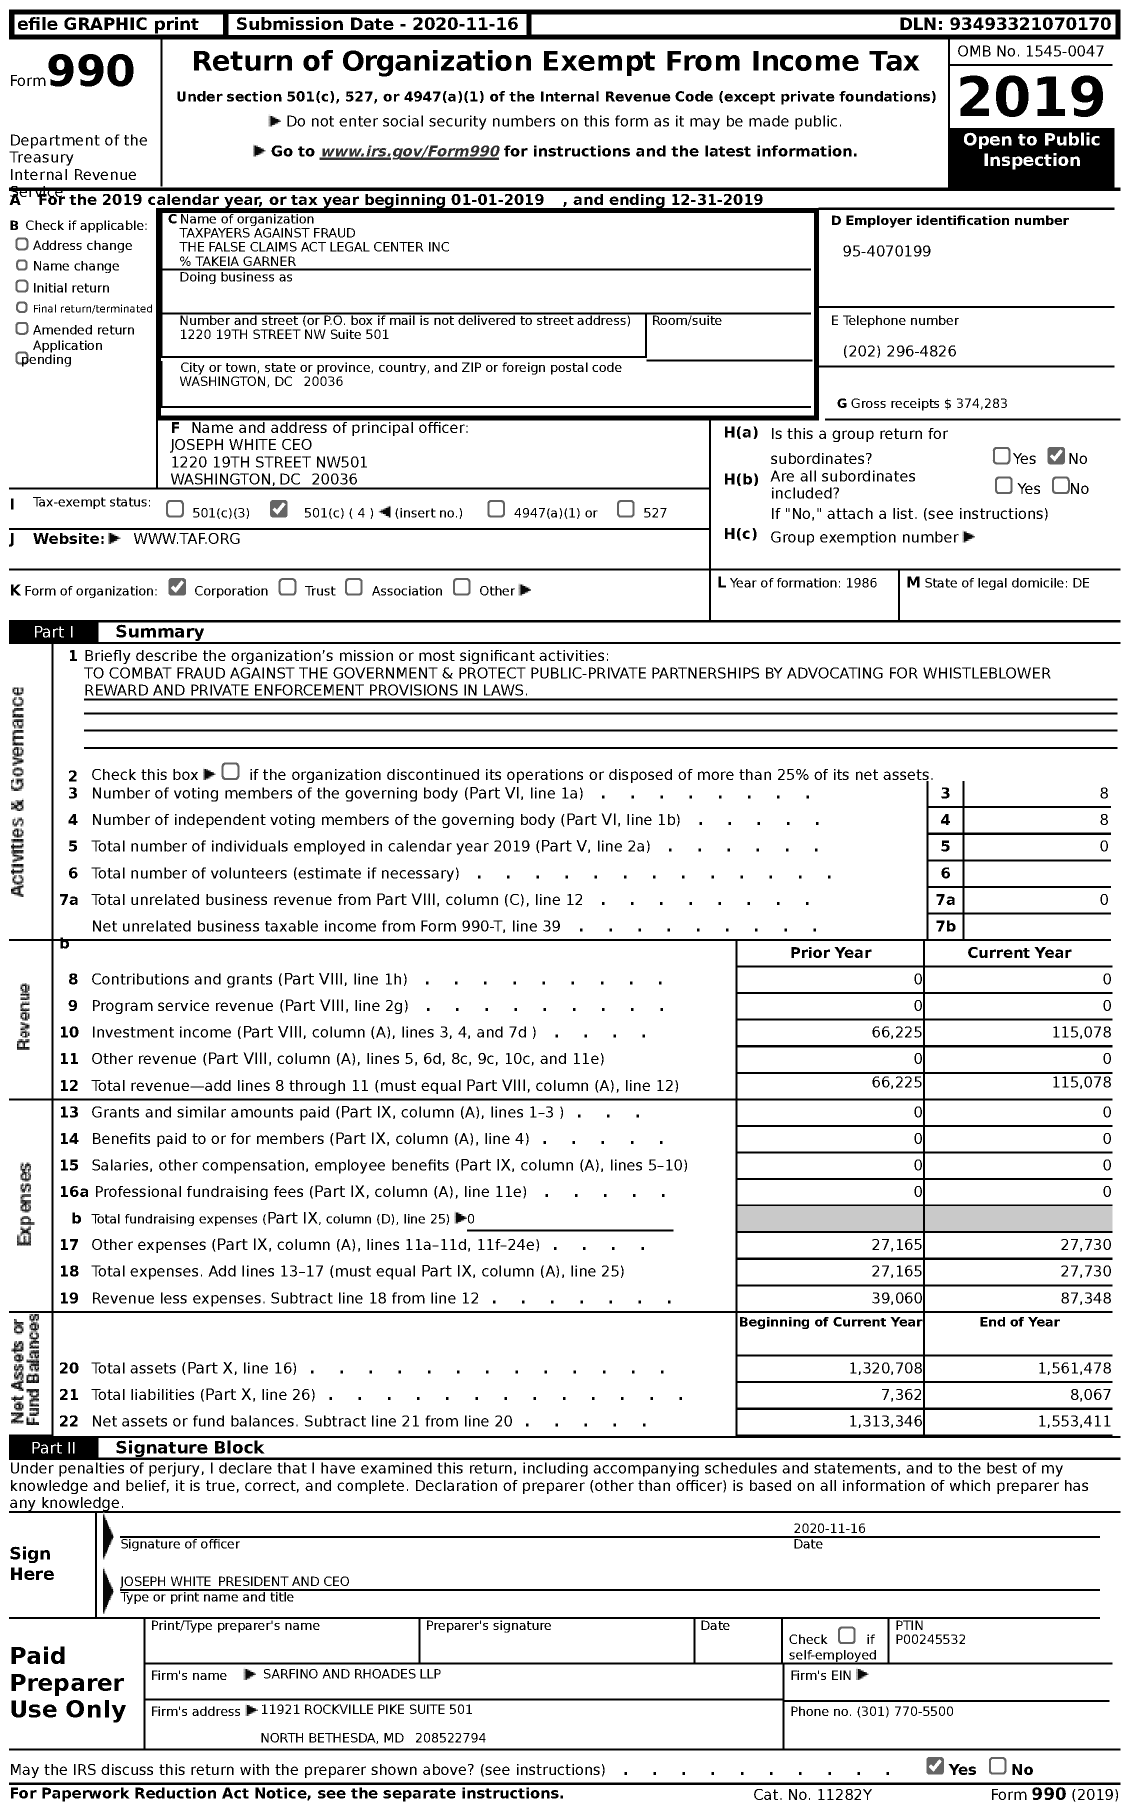 Image of first page of 2019 Form 990 for Taxpayers Against Fraud the False Claims Act Legal Center